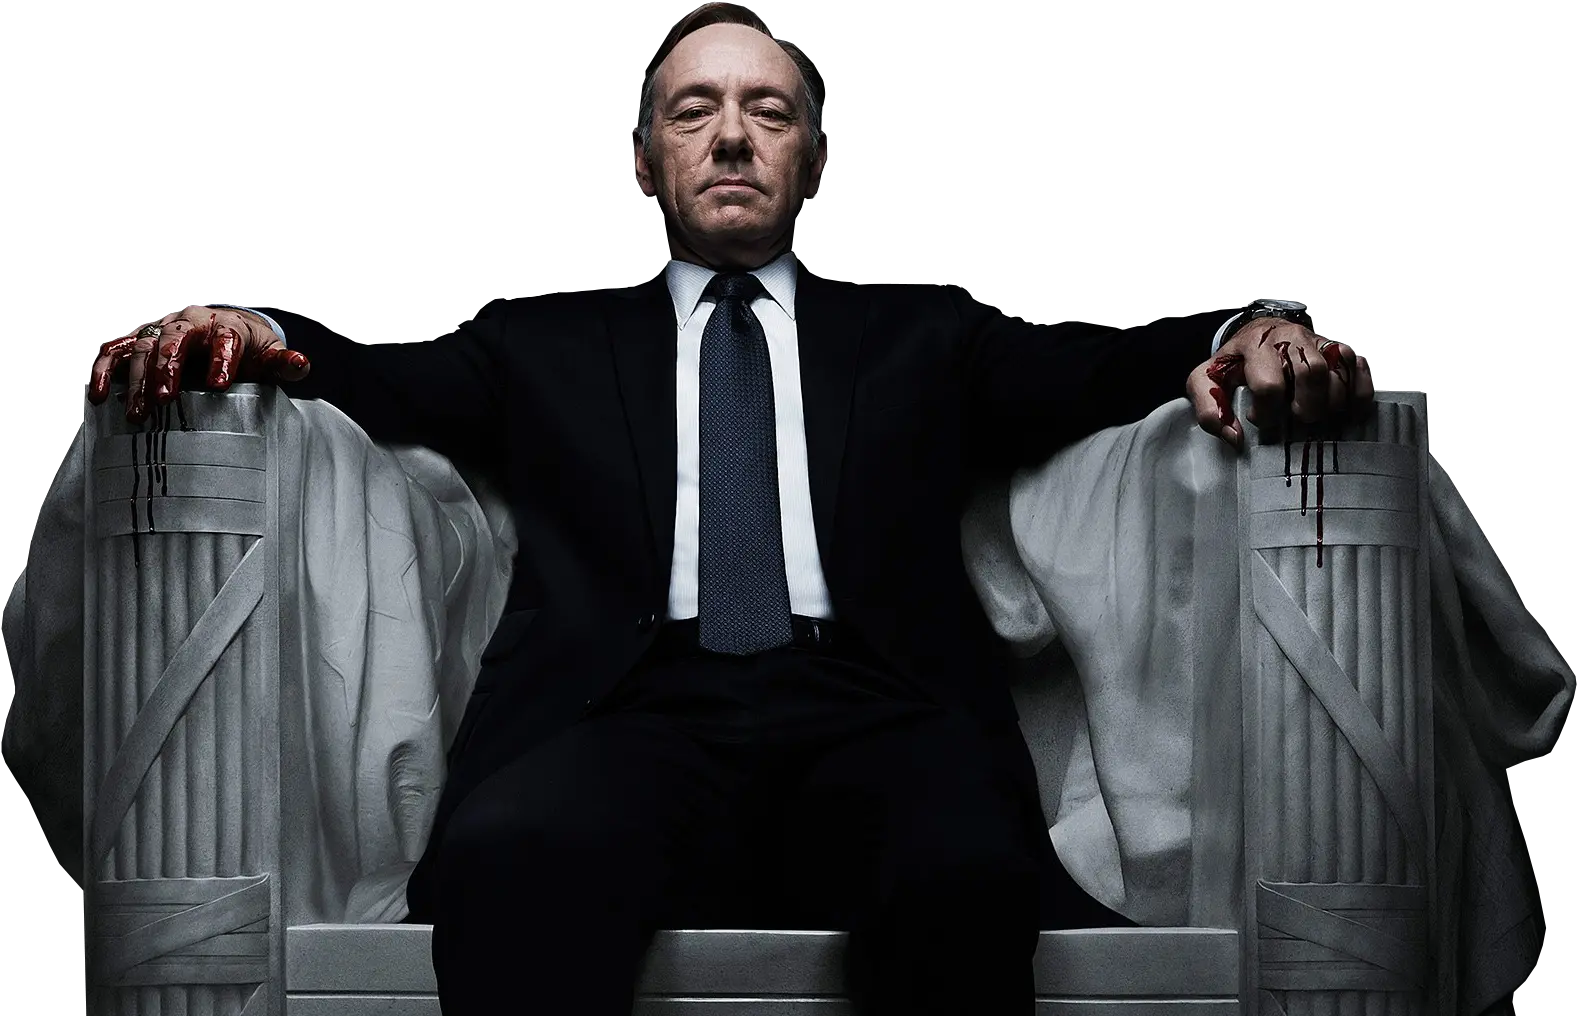 Png Frank Underwood House Of Cards Imgur Kevin Spacey In House Of Cards Card Suit Png